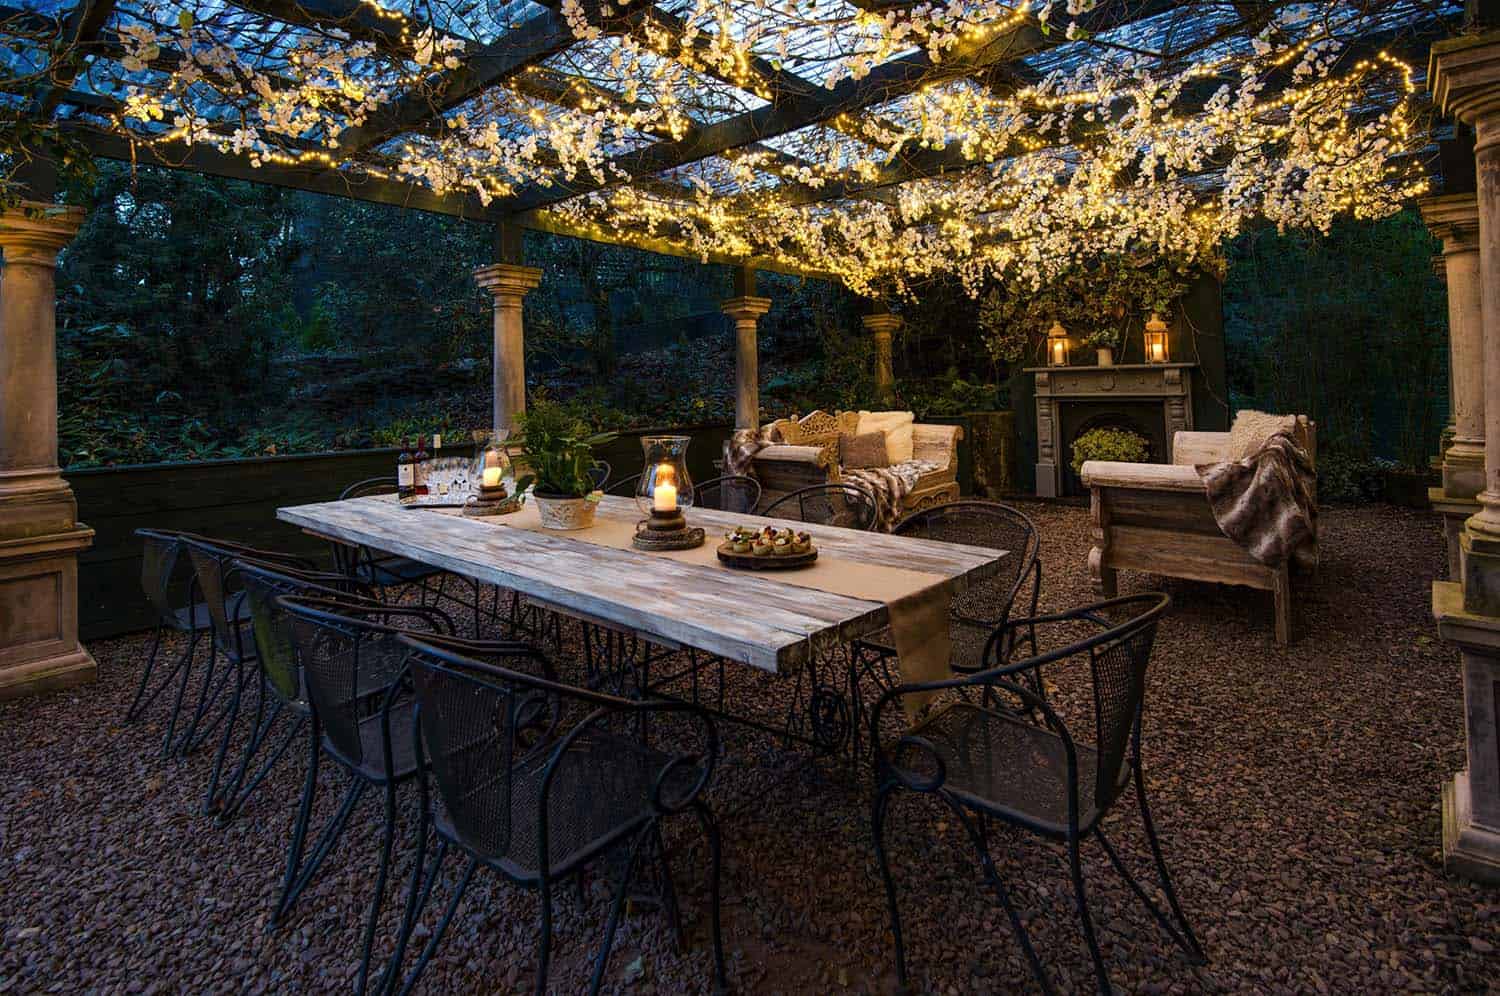 35 Brilliant and inspiring patio ideas for outdoor living ...